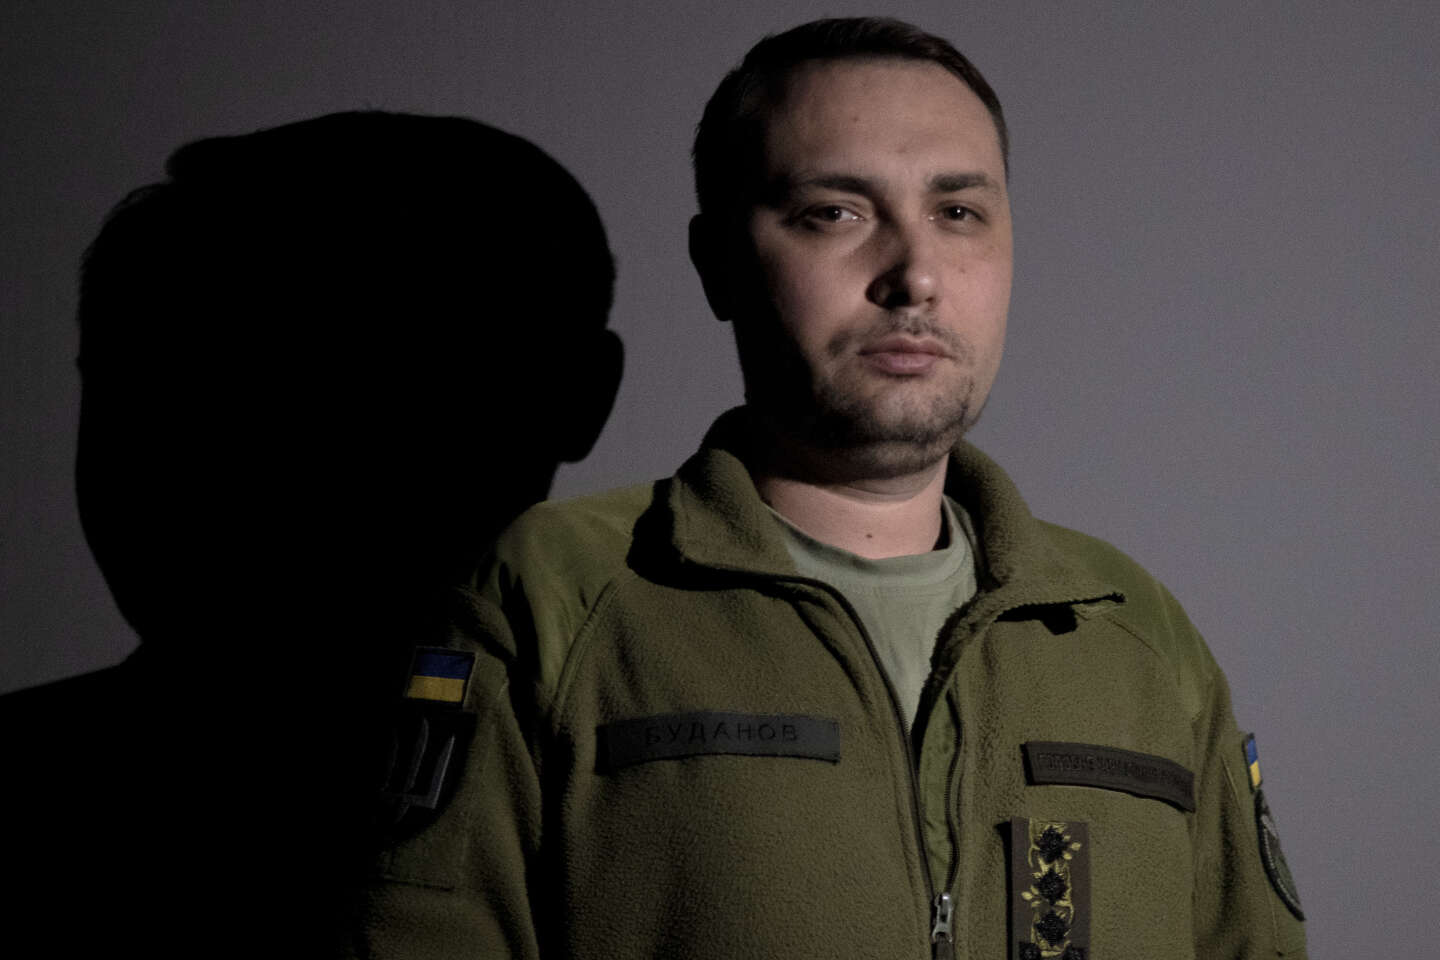 Russian prisoners tell us they are waging war against NATO